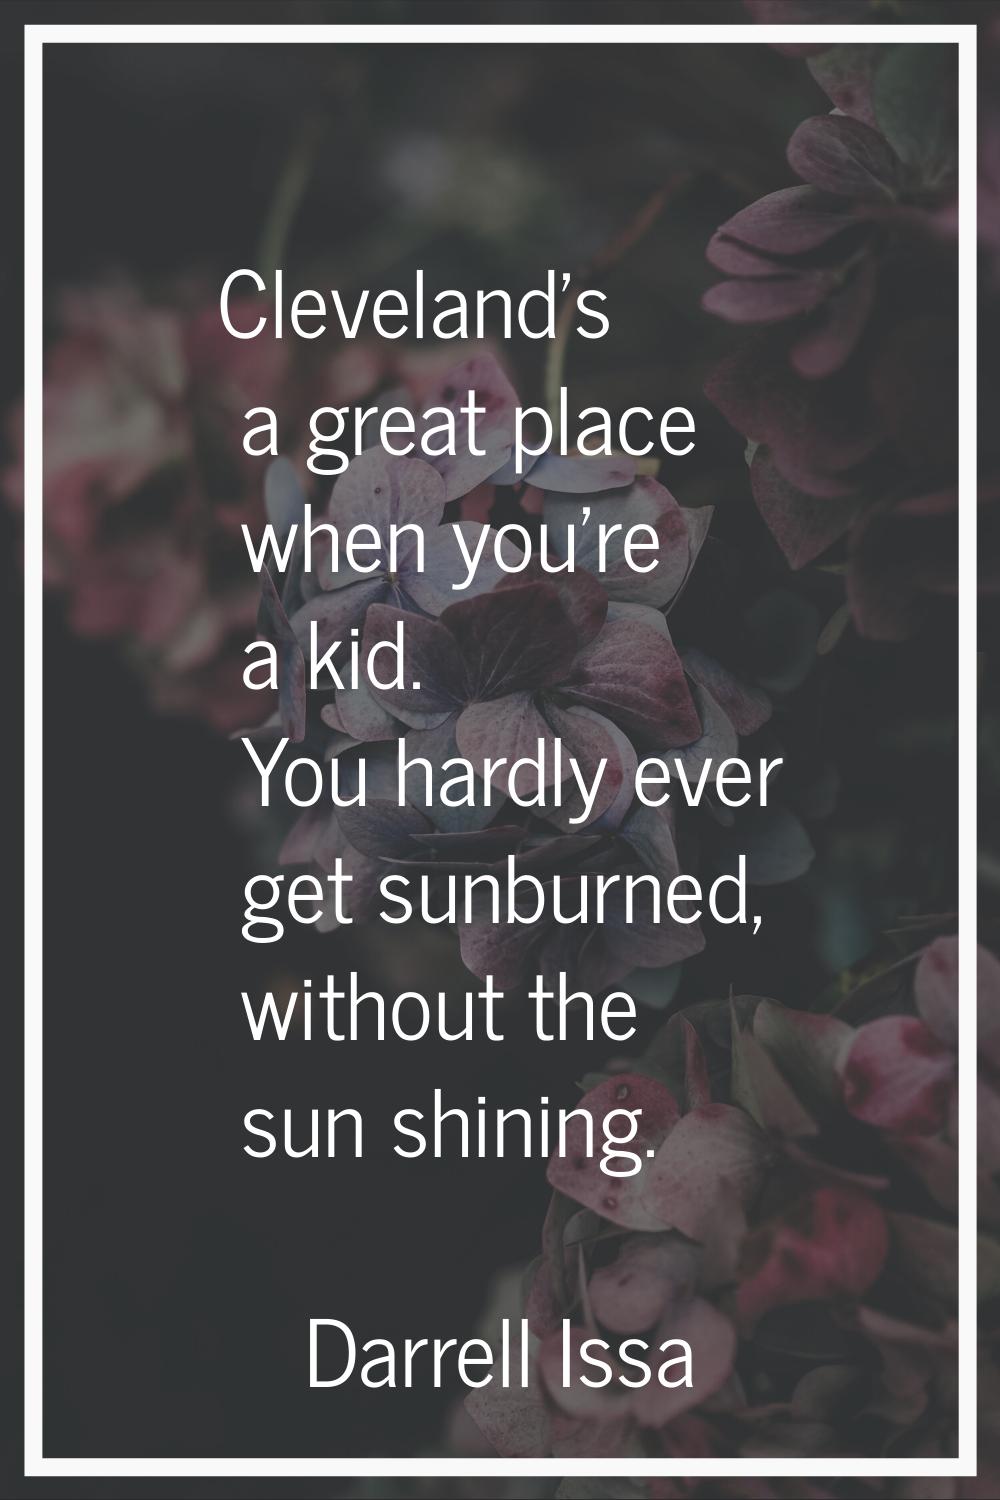 Cleveland's a great place when you're a kid. You hardly ever get sunburned, without the sun shining